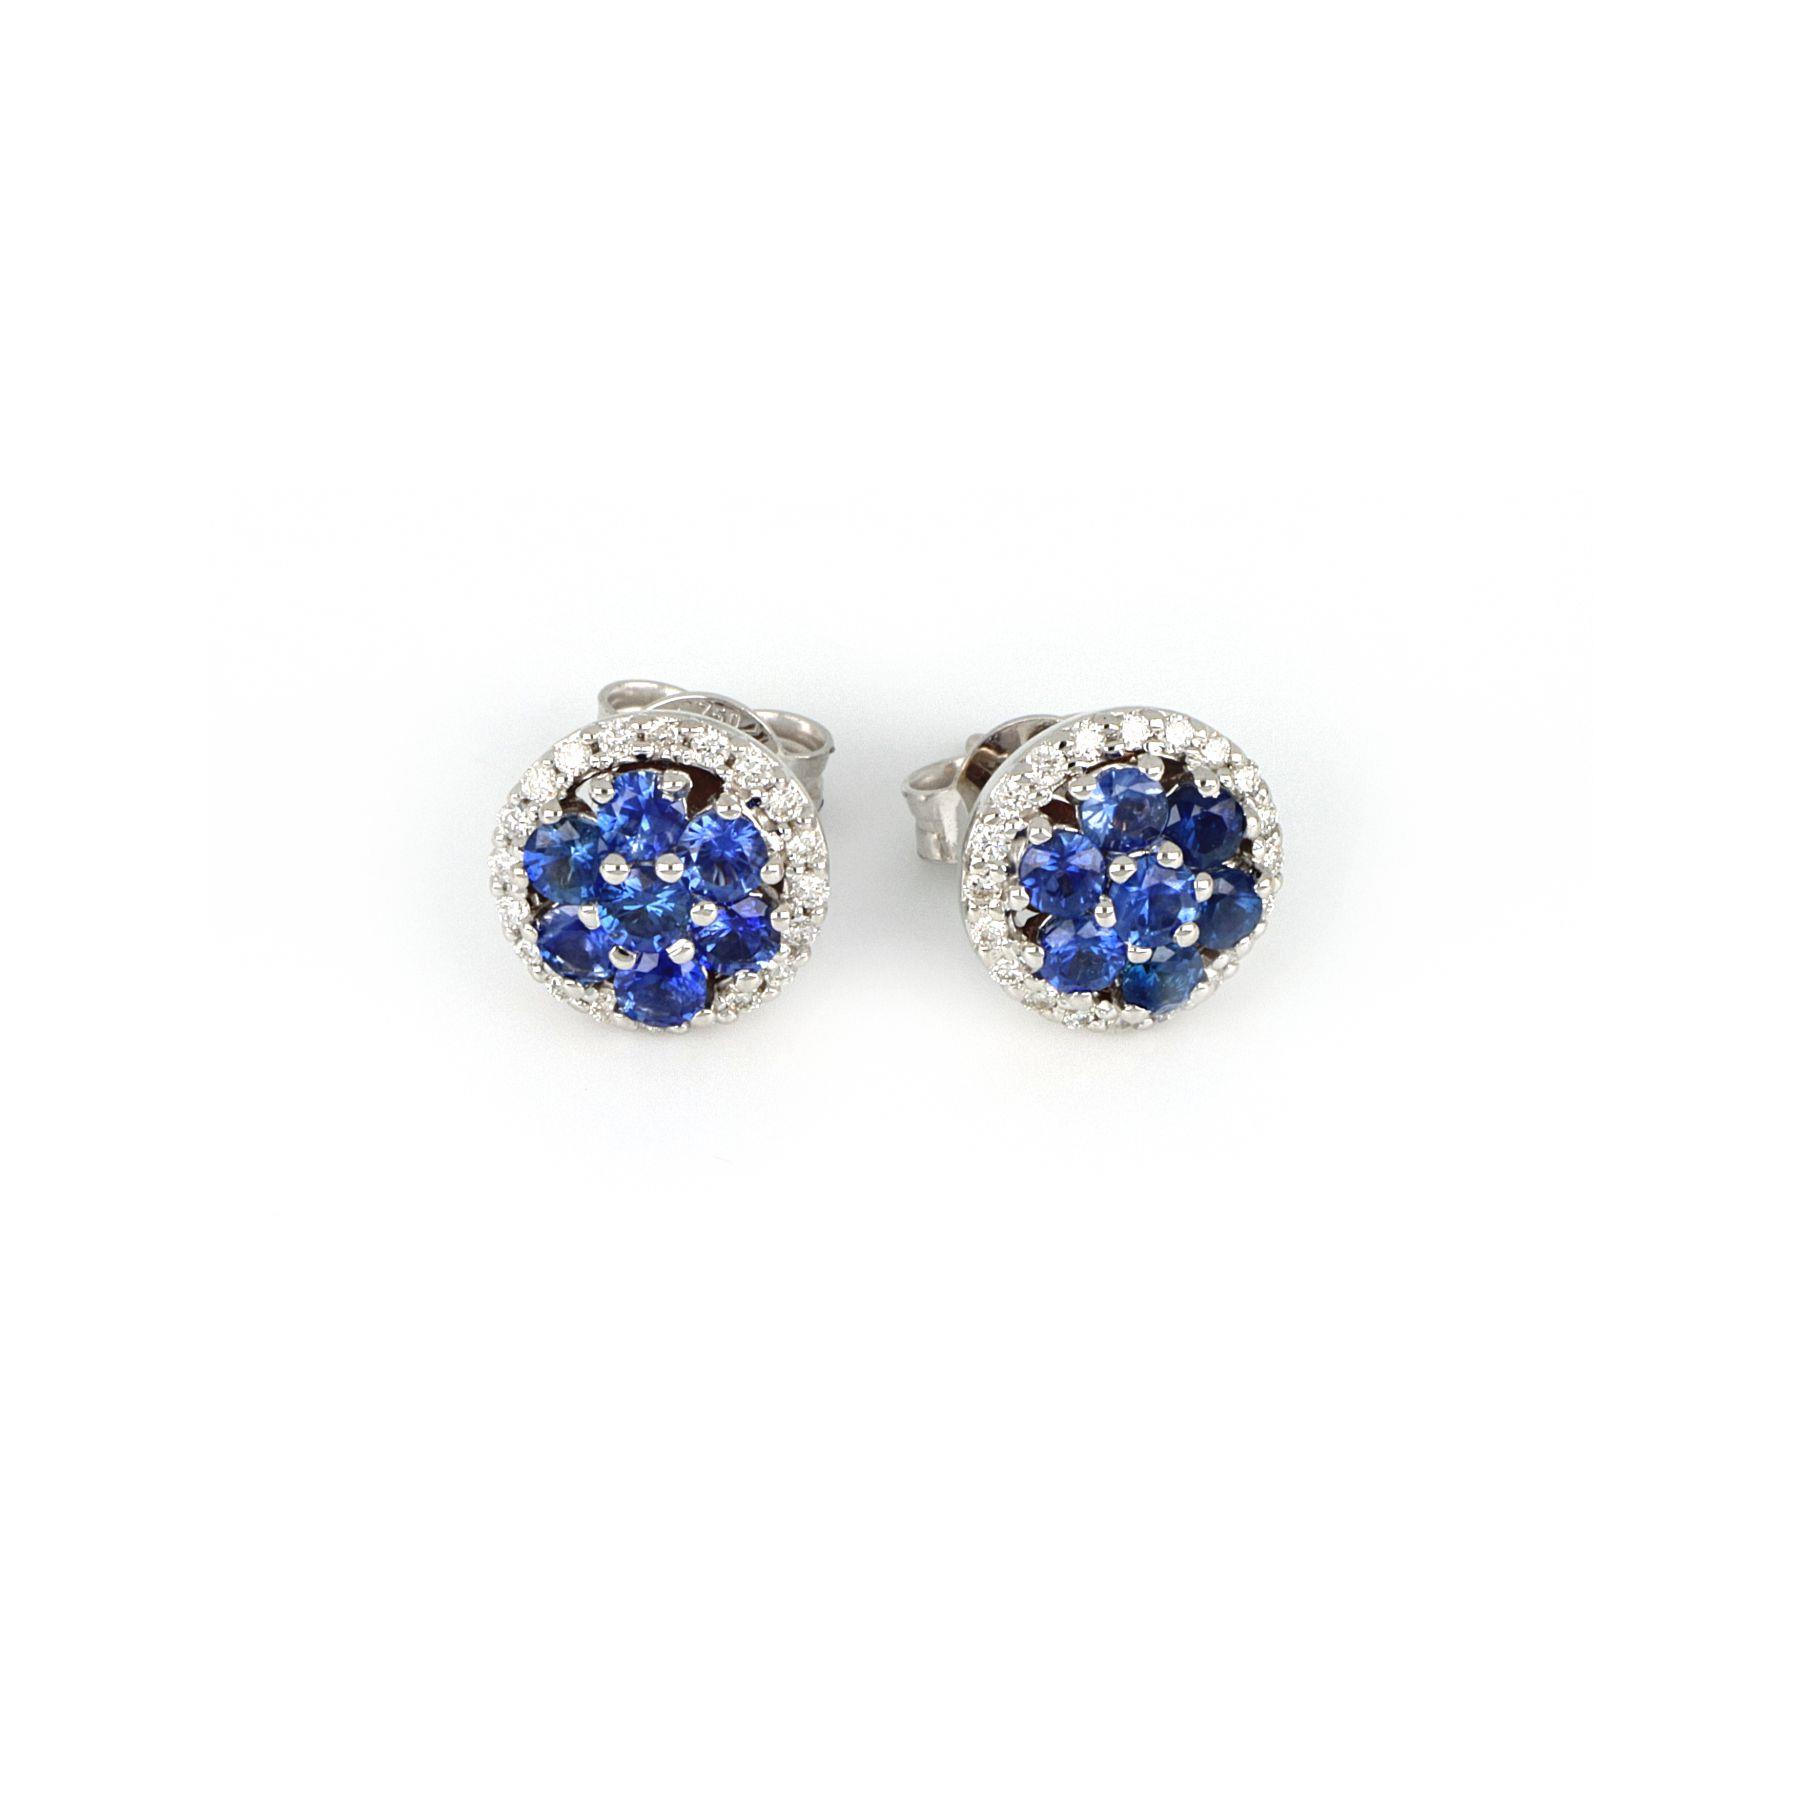 White gold earrings with sapphires and diamonds - GOLD ART